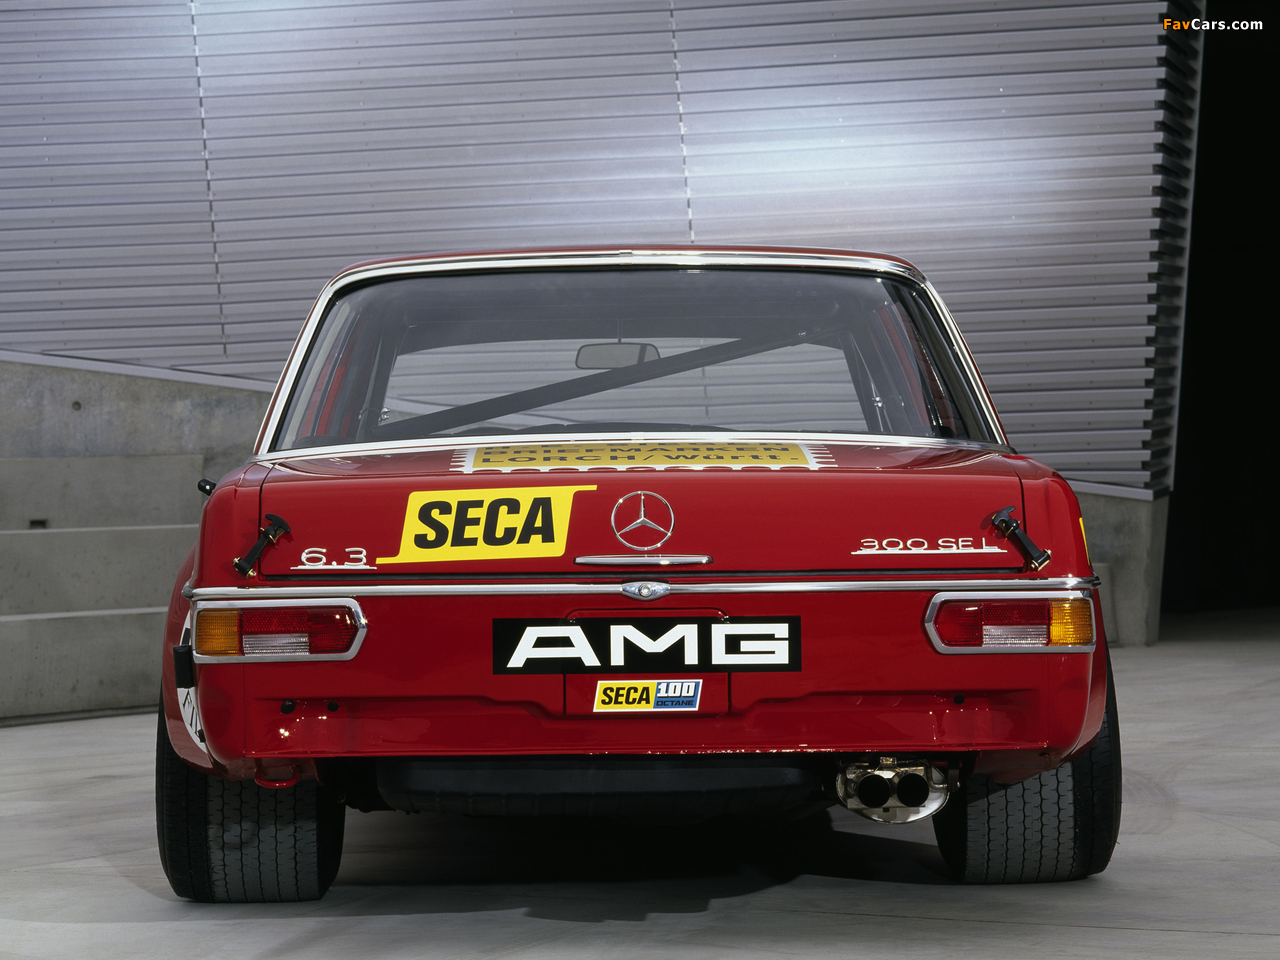 AMG 300SEL 6.3 Race Car (W109) 1971 pictures (1280 x 960)